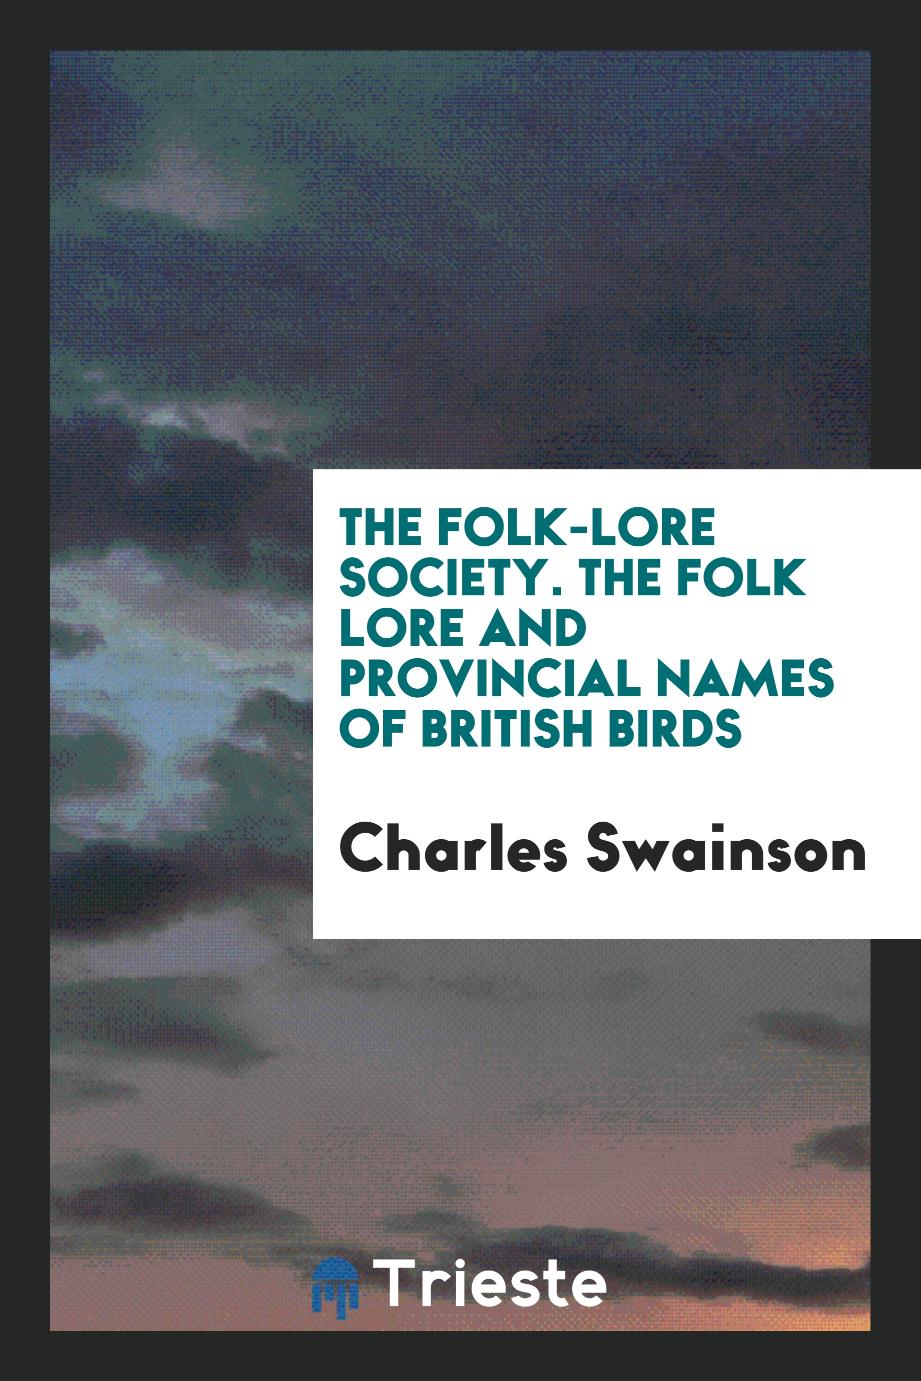 The Folk-Lore Society. The Folk Lore and Provincial Names of British Birds